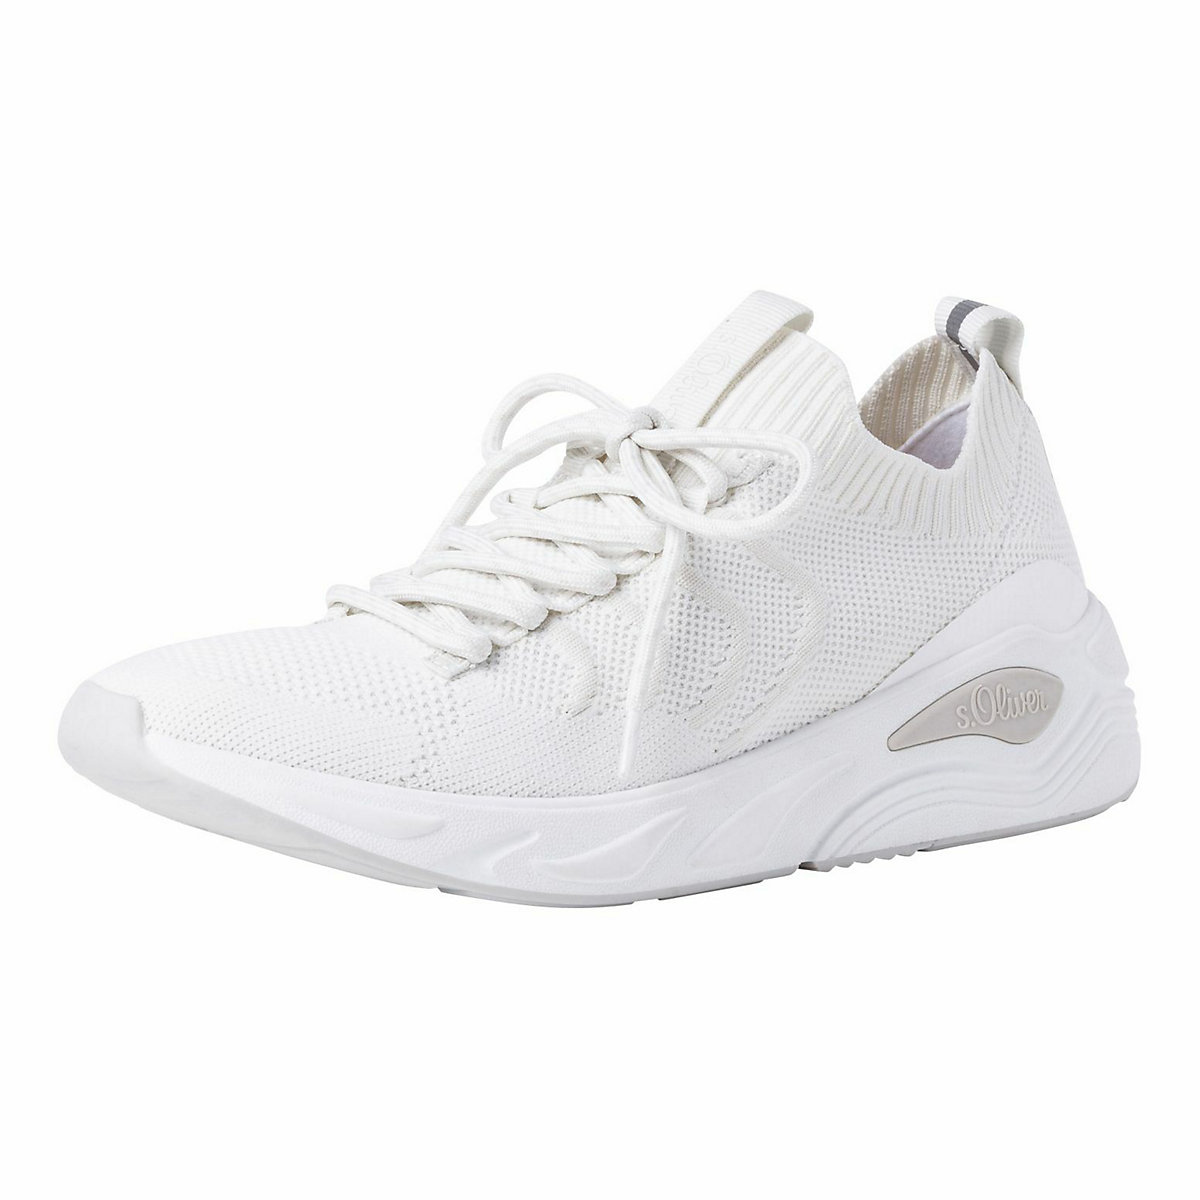 s.Oliver s.Oliver Sneaker Sneakers Low weiß